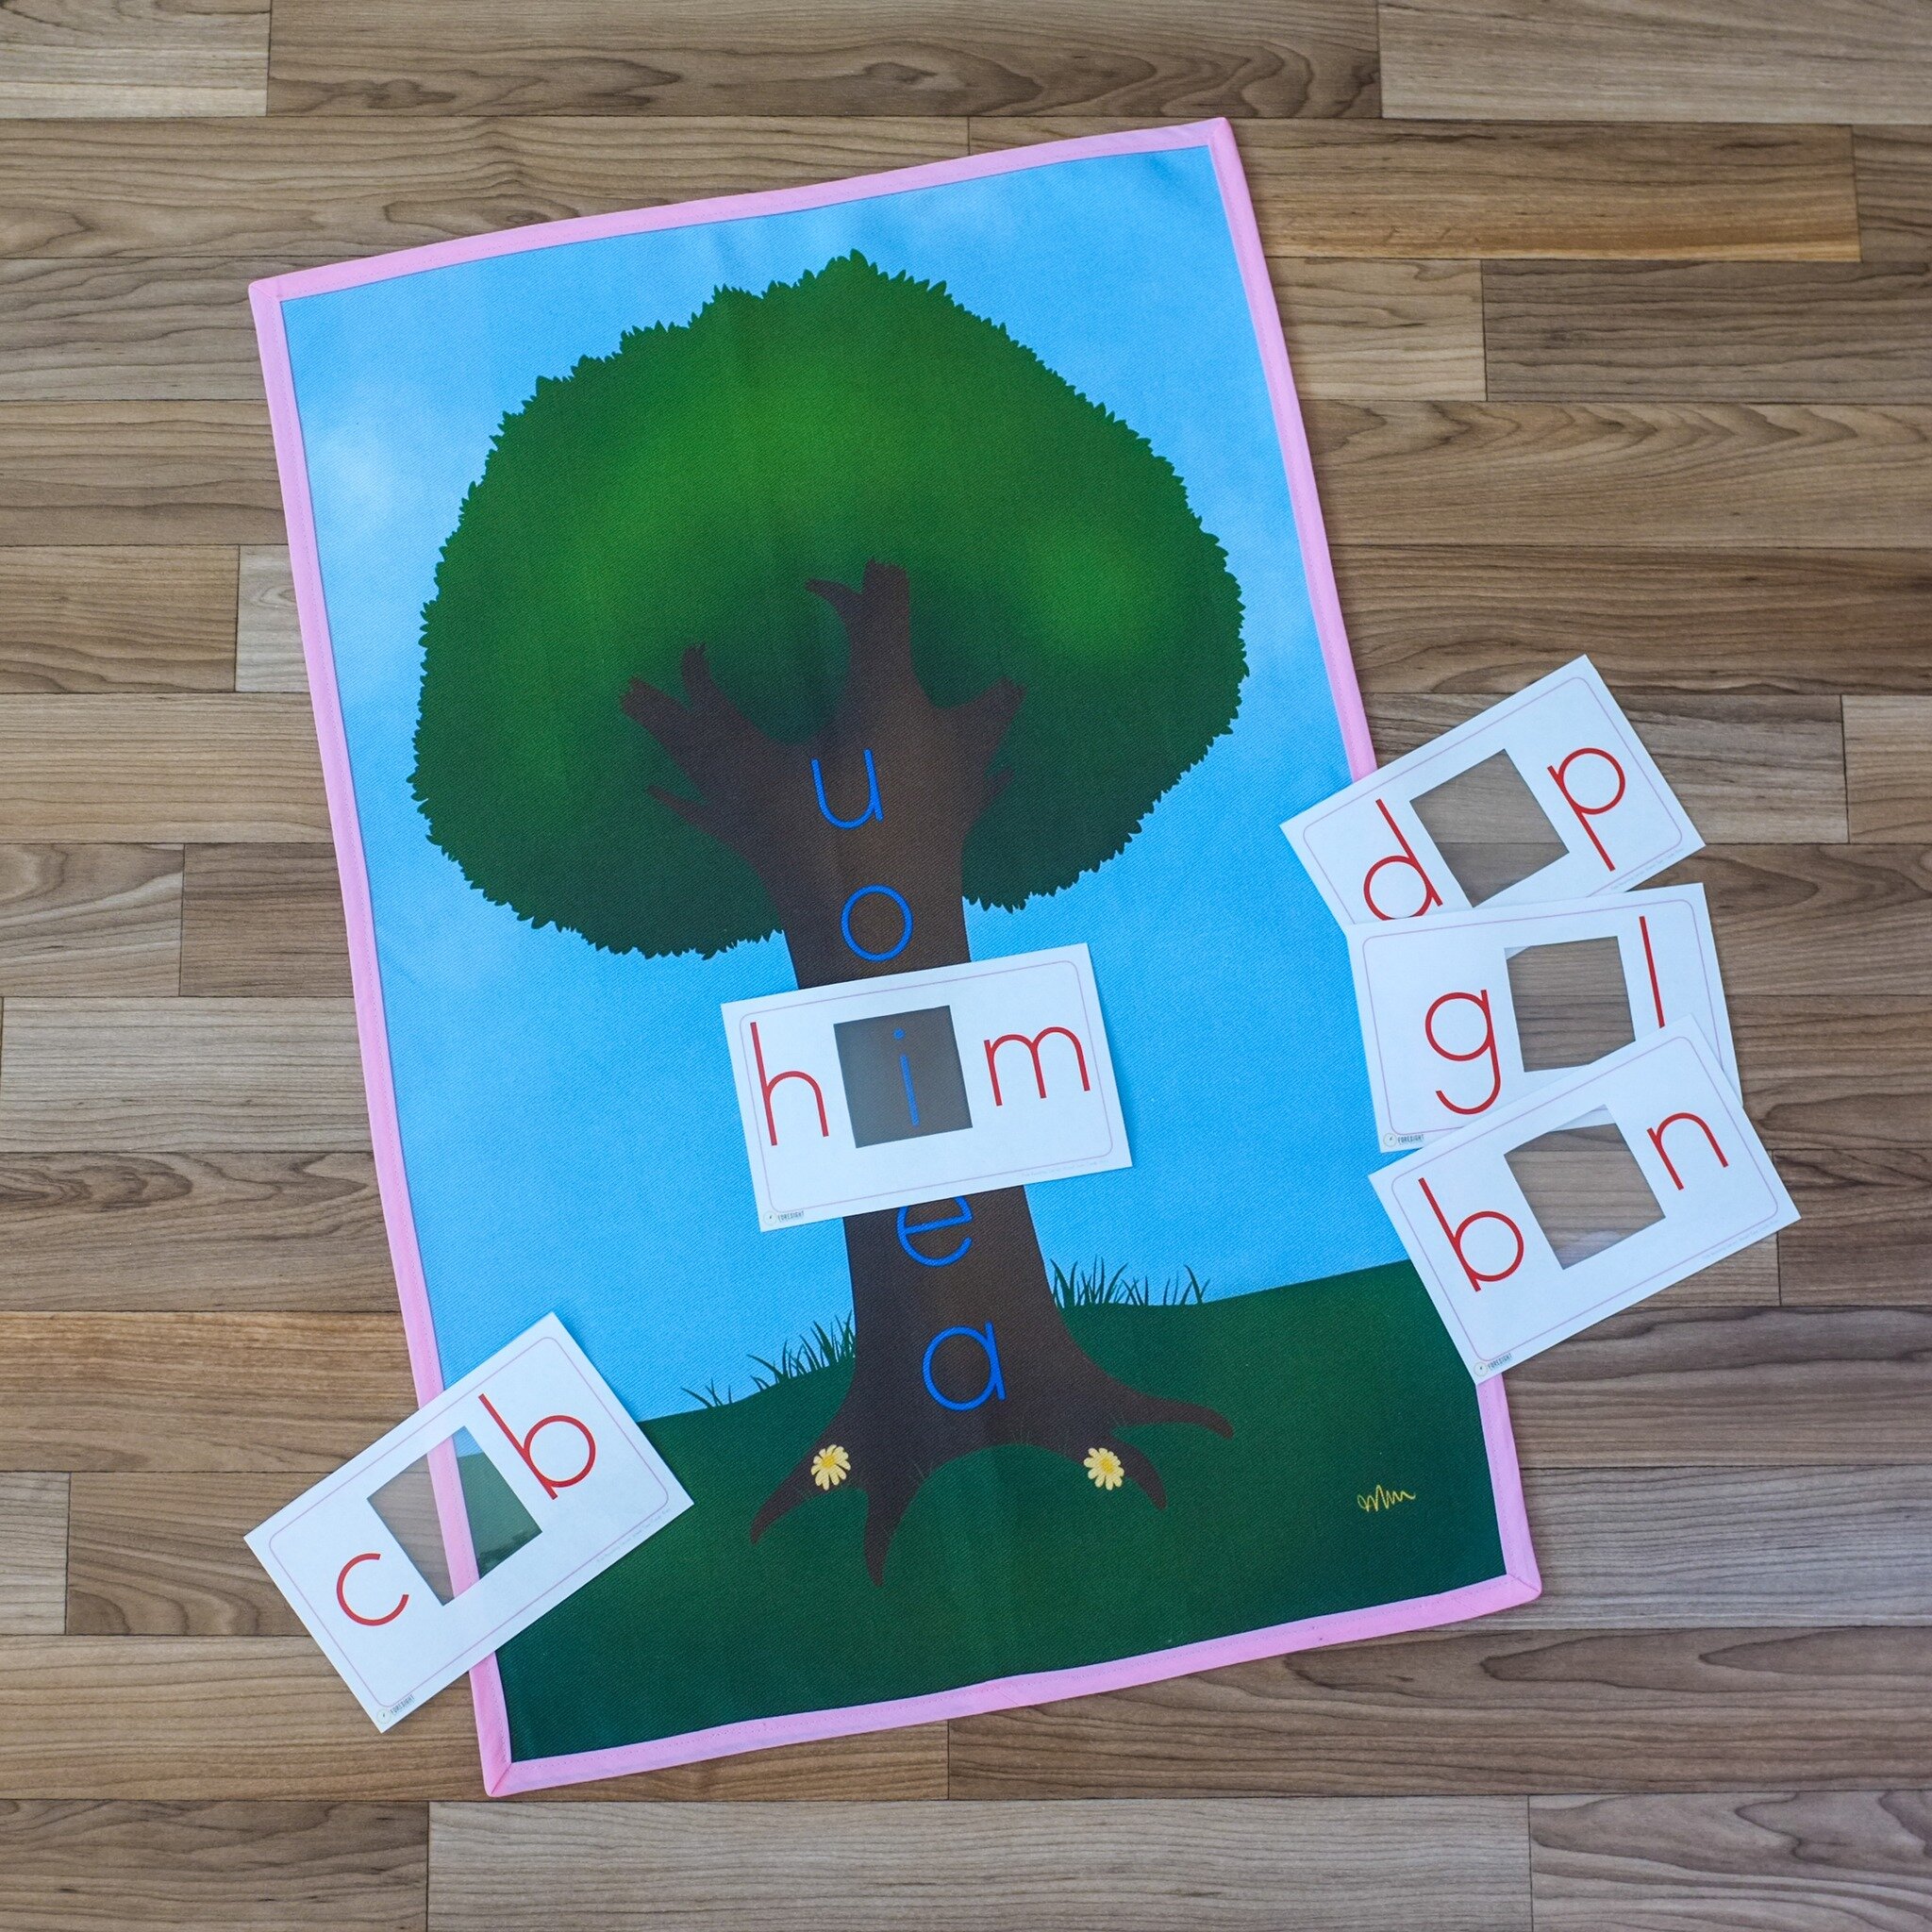 Did you know the vowel tree material has dual purposes? 
🌳
Firstly, vowels can be a bit tricky, so we created our Pink Series Vowel Tree to allow children an engaging way to practice the middle sound so it gets stronger and easier to recognize. Chil